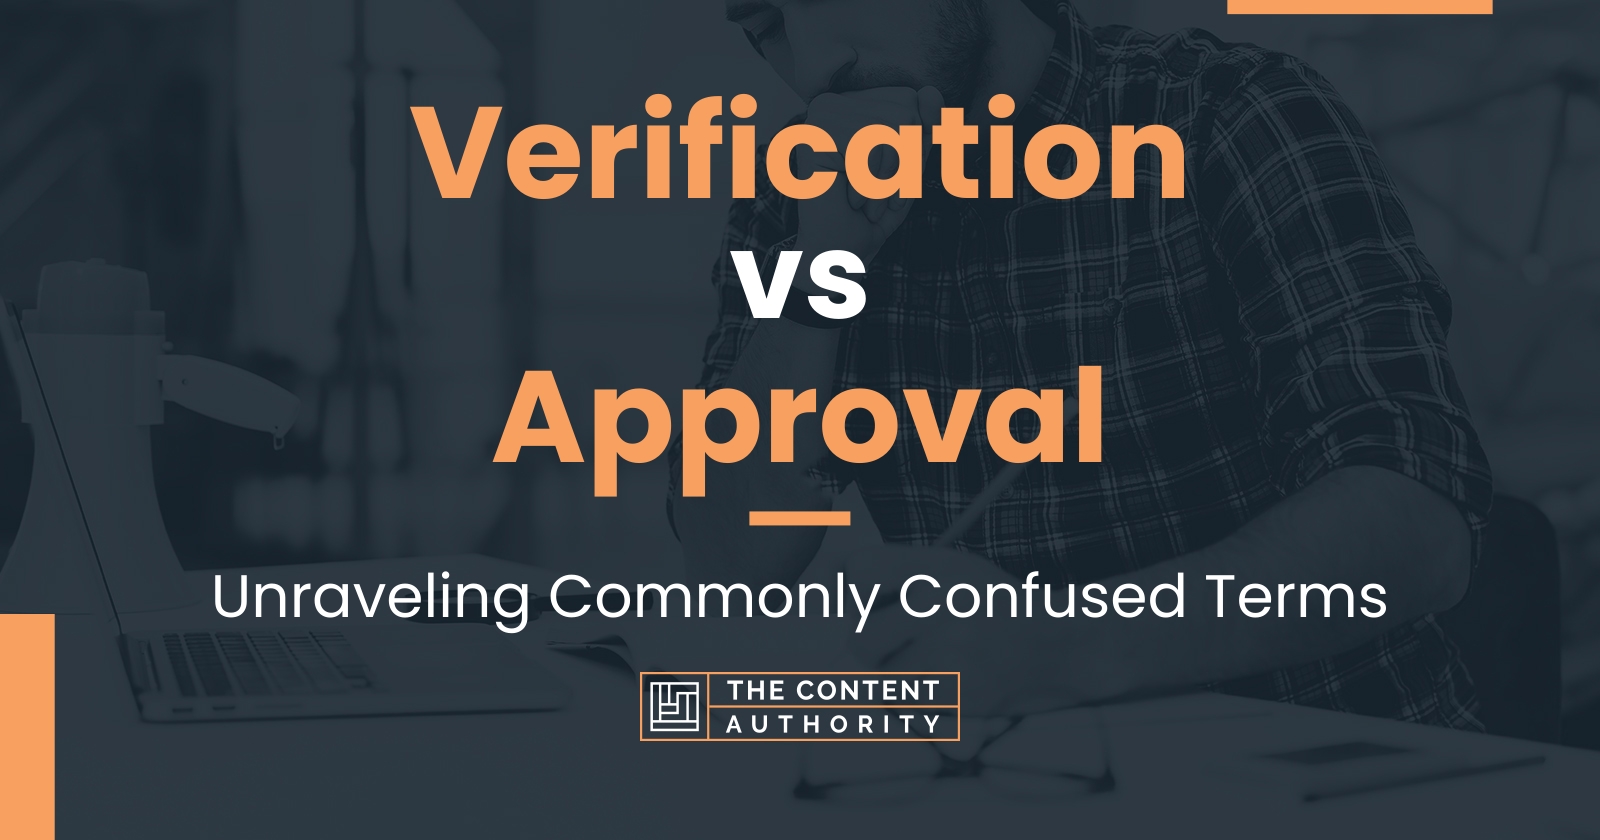 Verification vs Approval: Unraveling Commonly Confused Terms